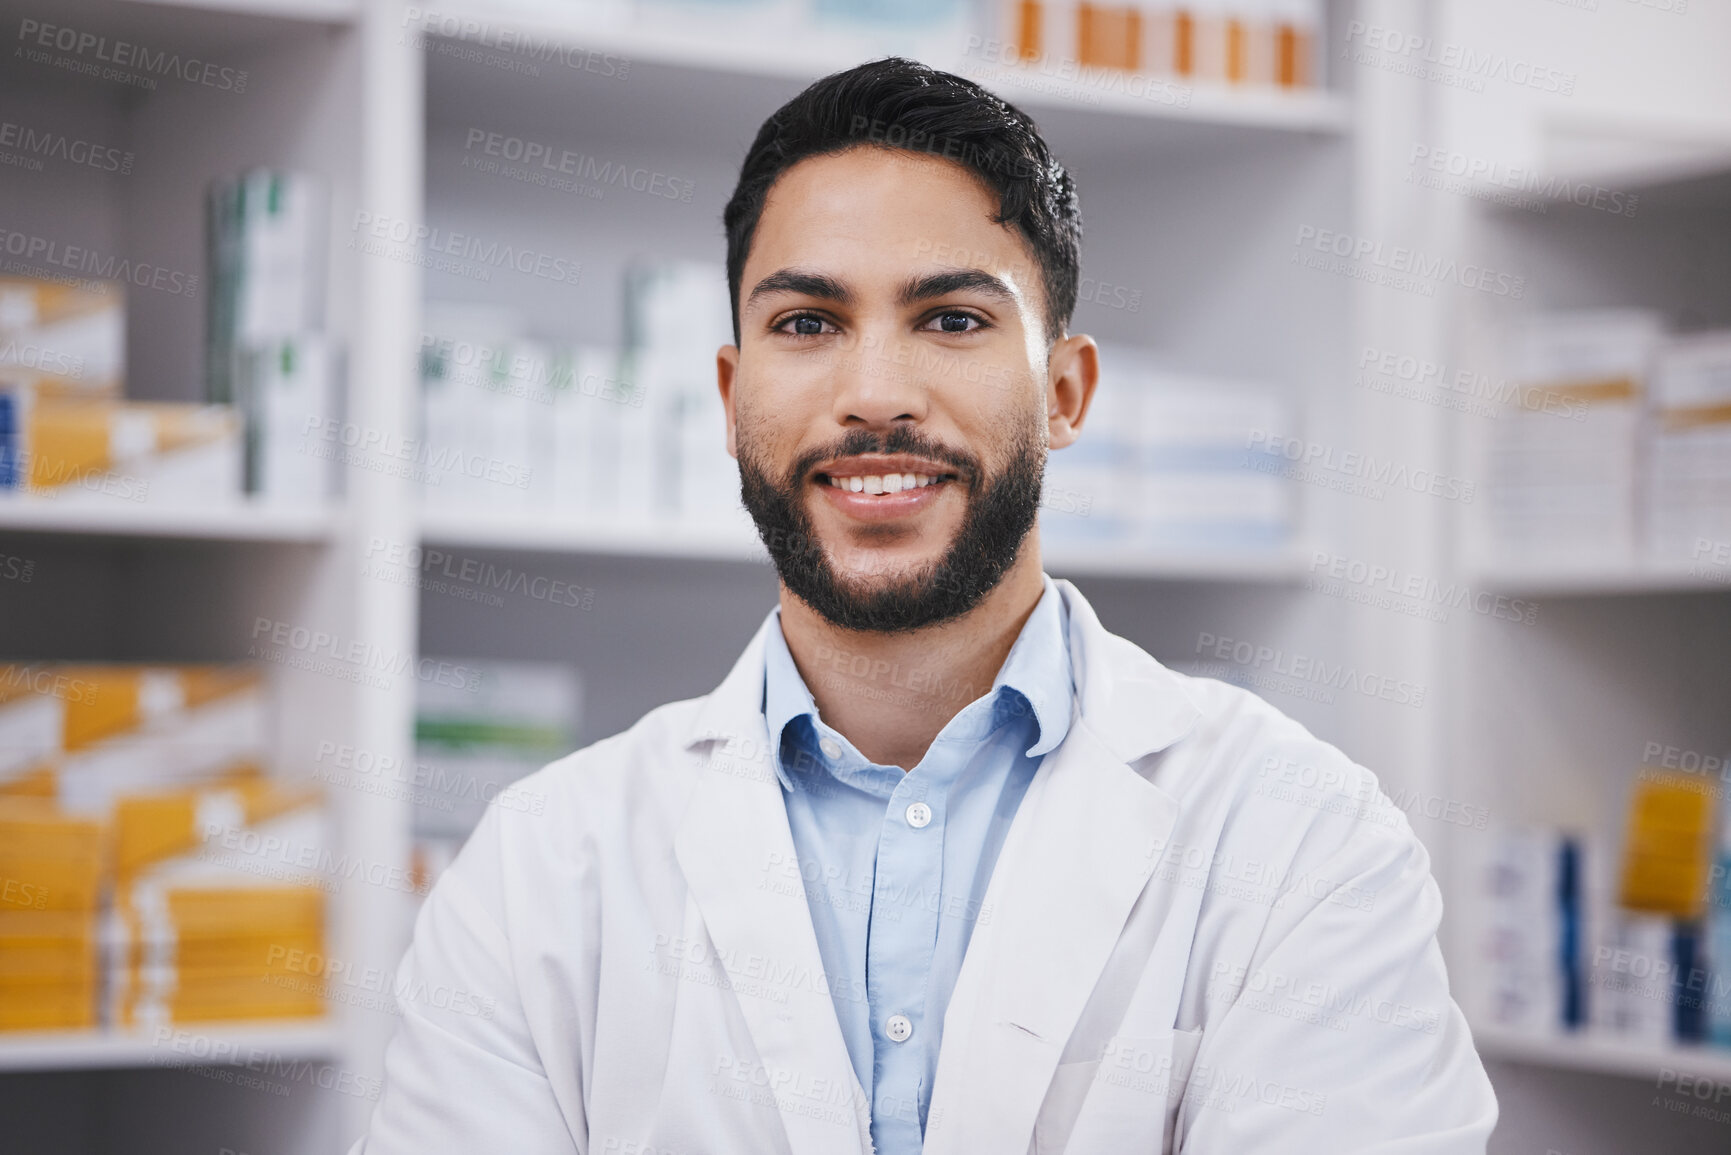 Buy stock photo Pharmacy, pharmacist or portrait of man with smile in healthcare drugstore or hospital clinic alone. Face, wellness or happy male professional smiling by medication, medicine or shelf ready to help 